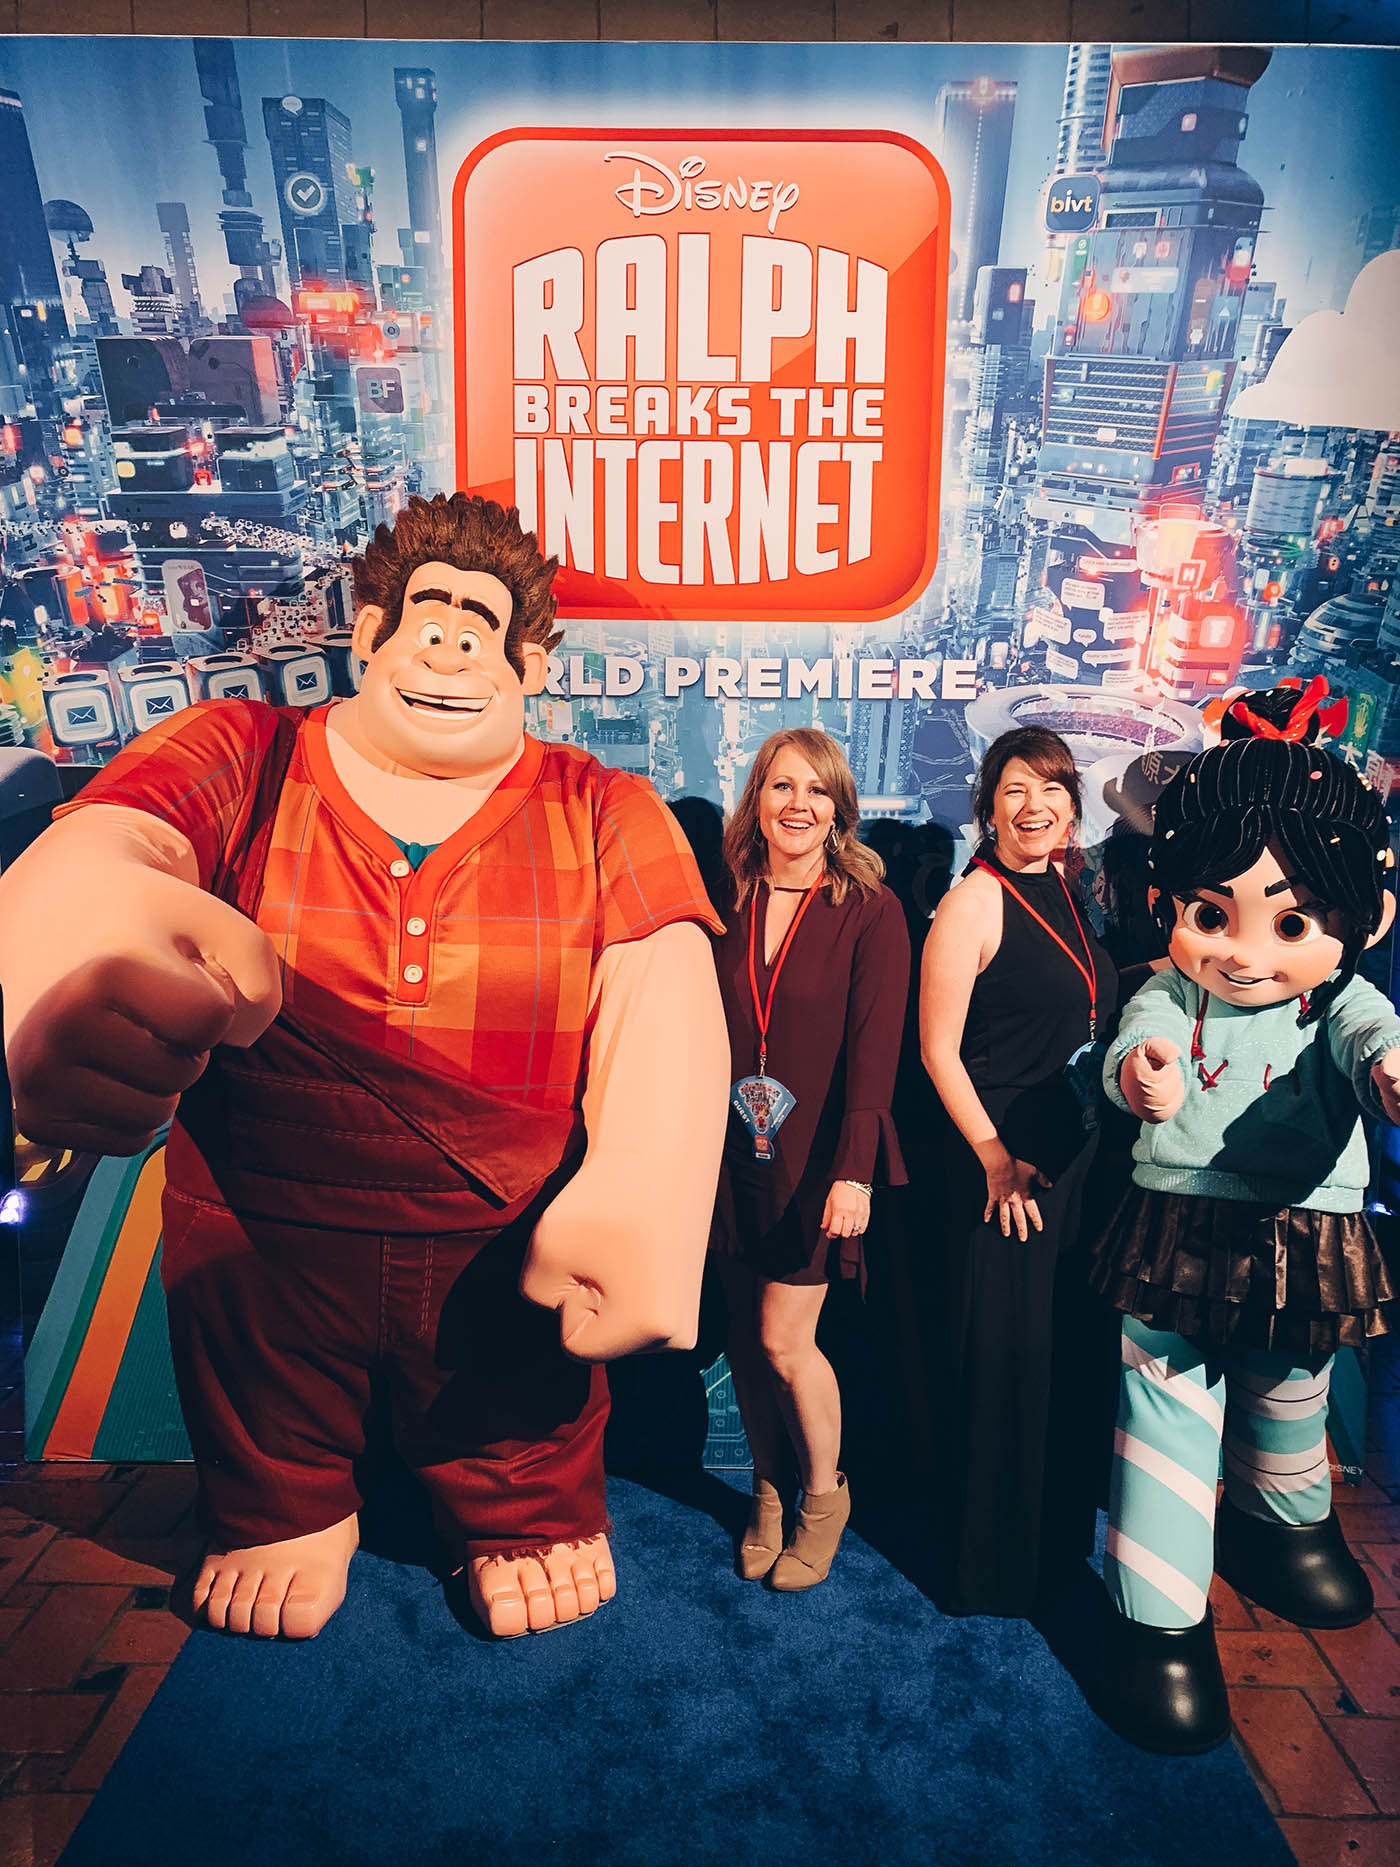 Ralph Breaks the Internet World Premiere - a blogger's experience on the blue carpet